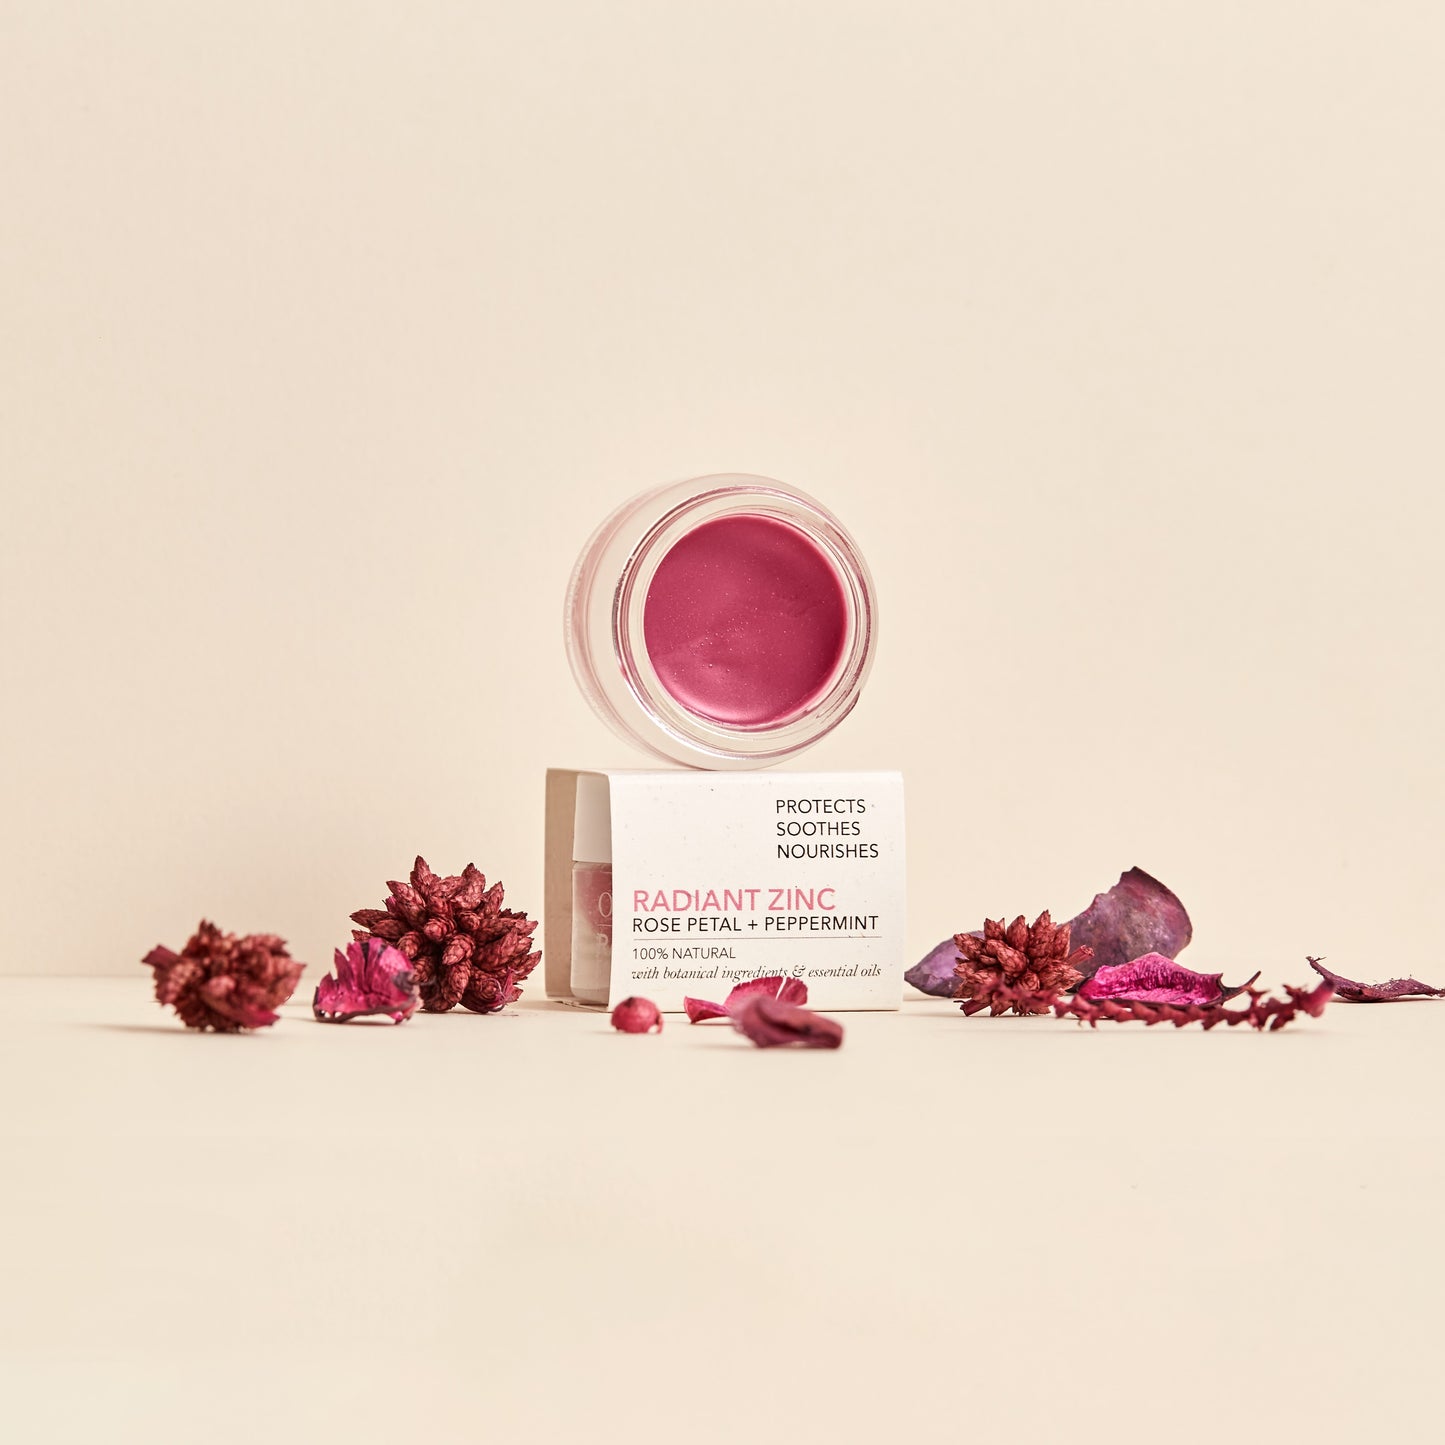 OMni Radiant Zinc Rose Petal natural multi-use balm for dry lips and skin, and blush on cheeks #6